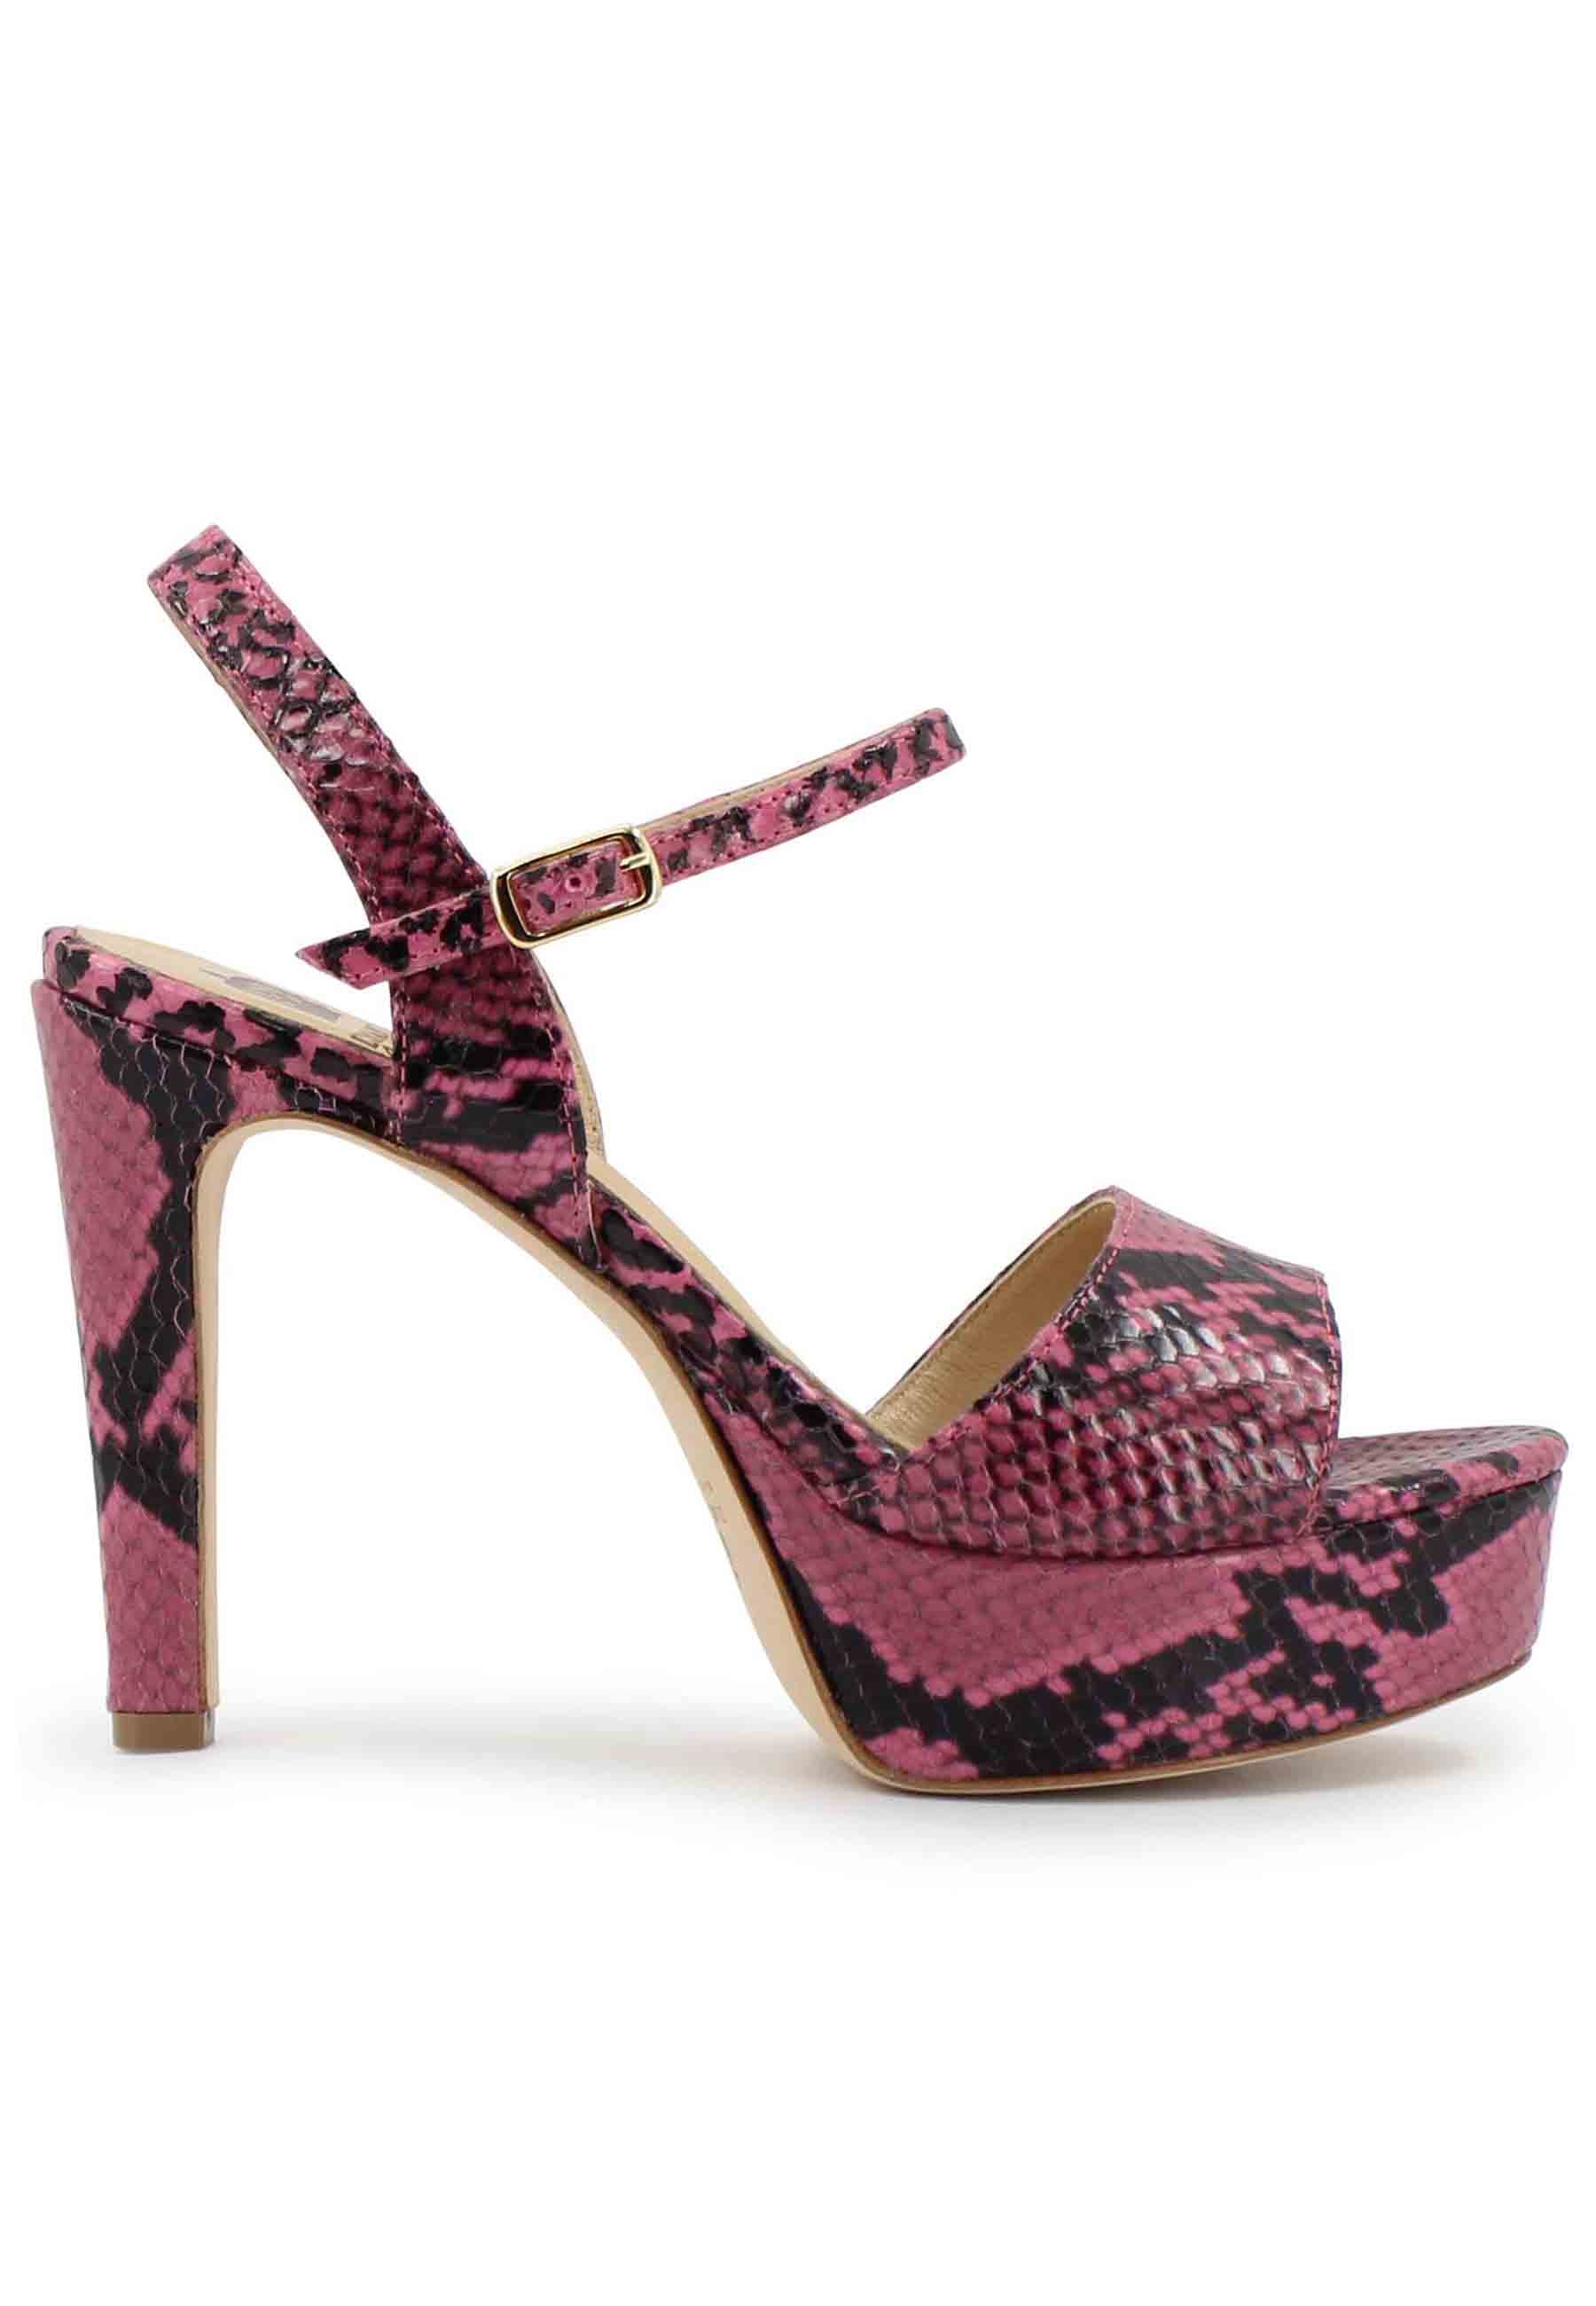 Women's pink printed leather sandals with high heel and platform